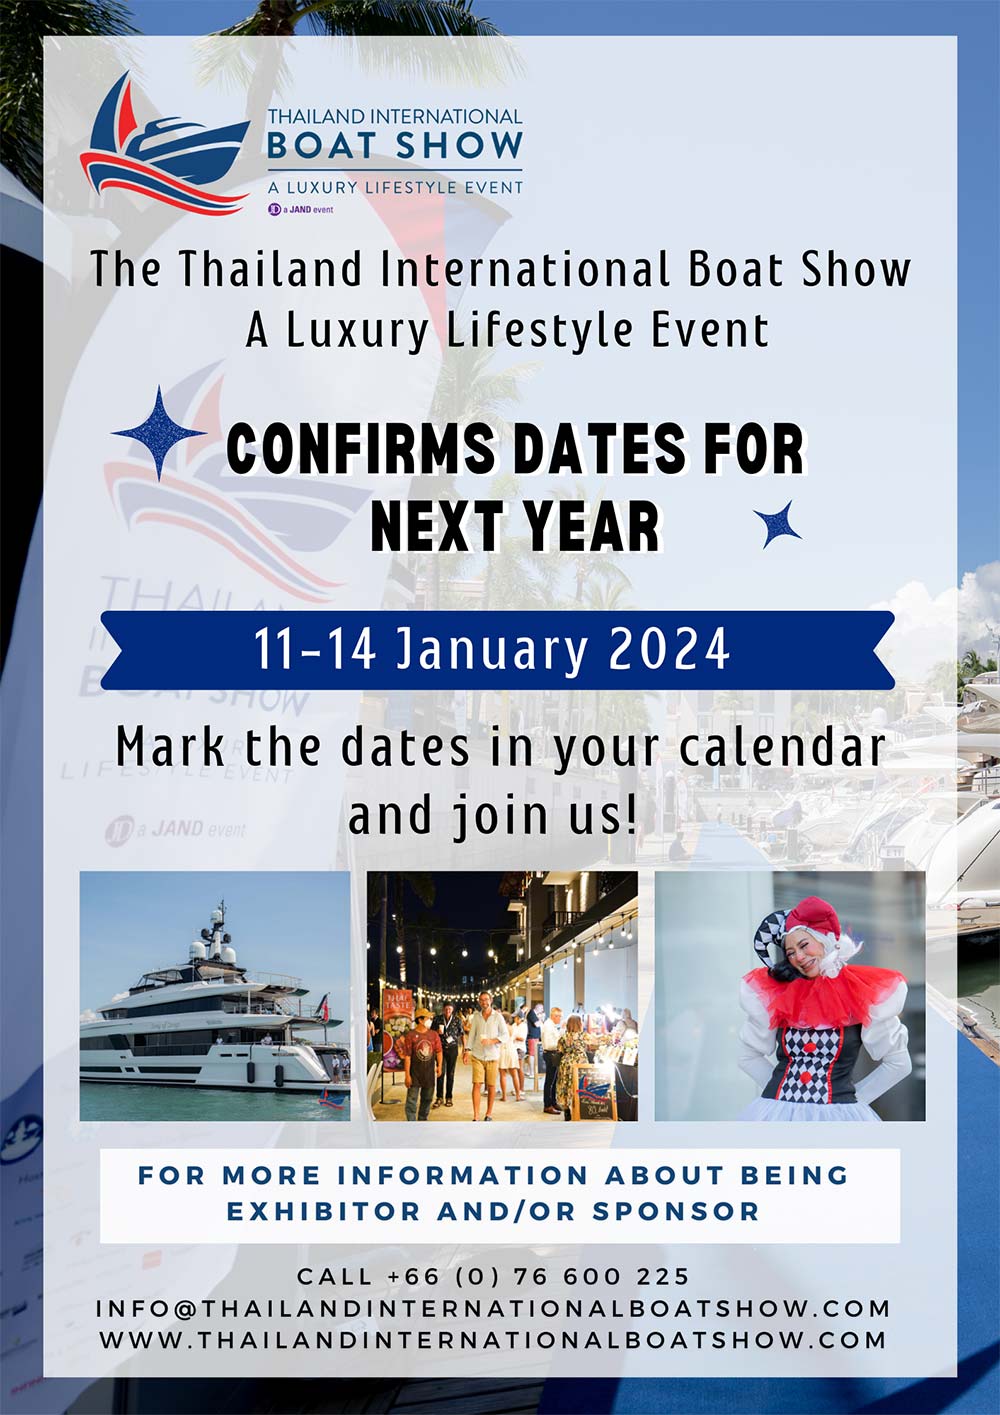 Confirmed Dates for 2024 Thailand International Boat Show A Luxury Lifestyle Event